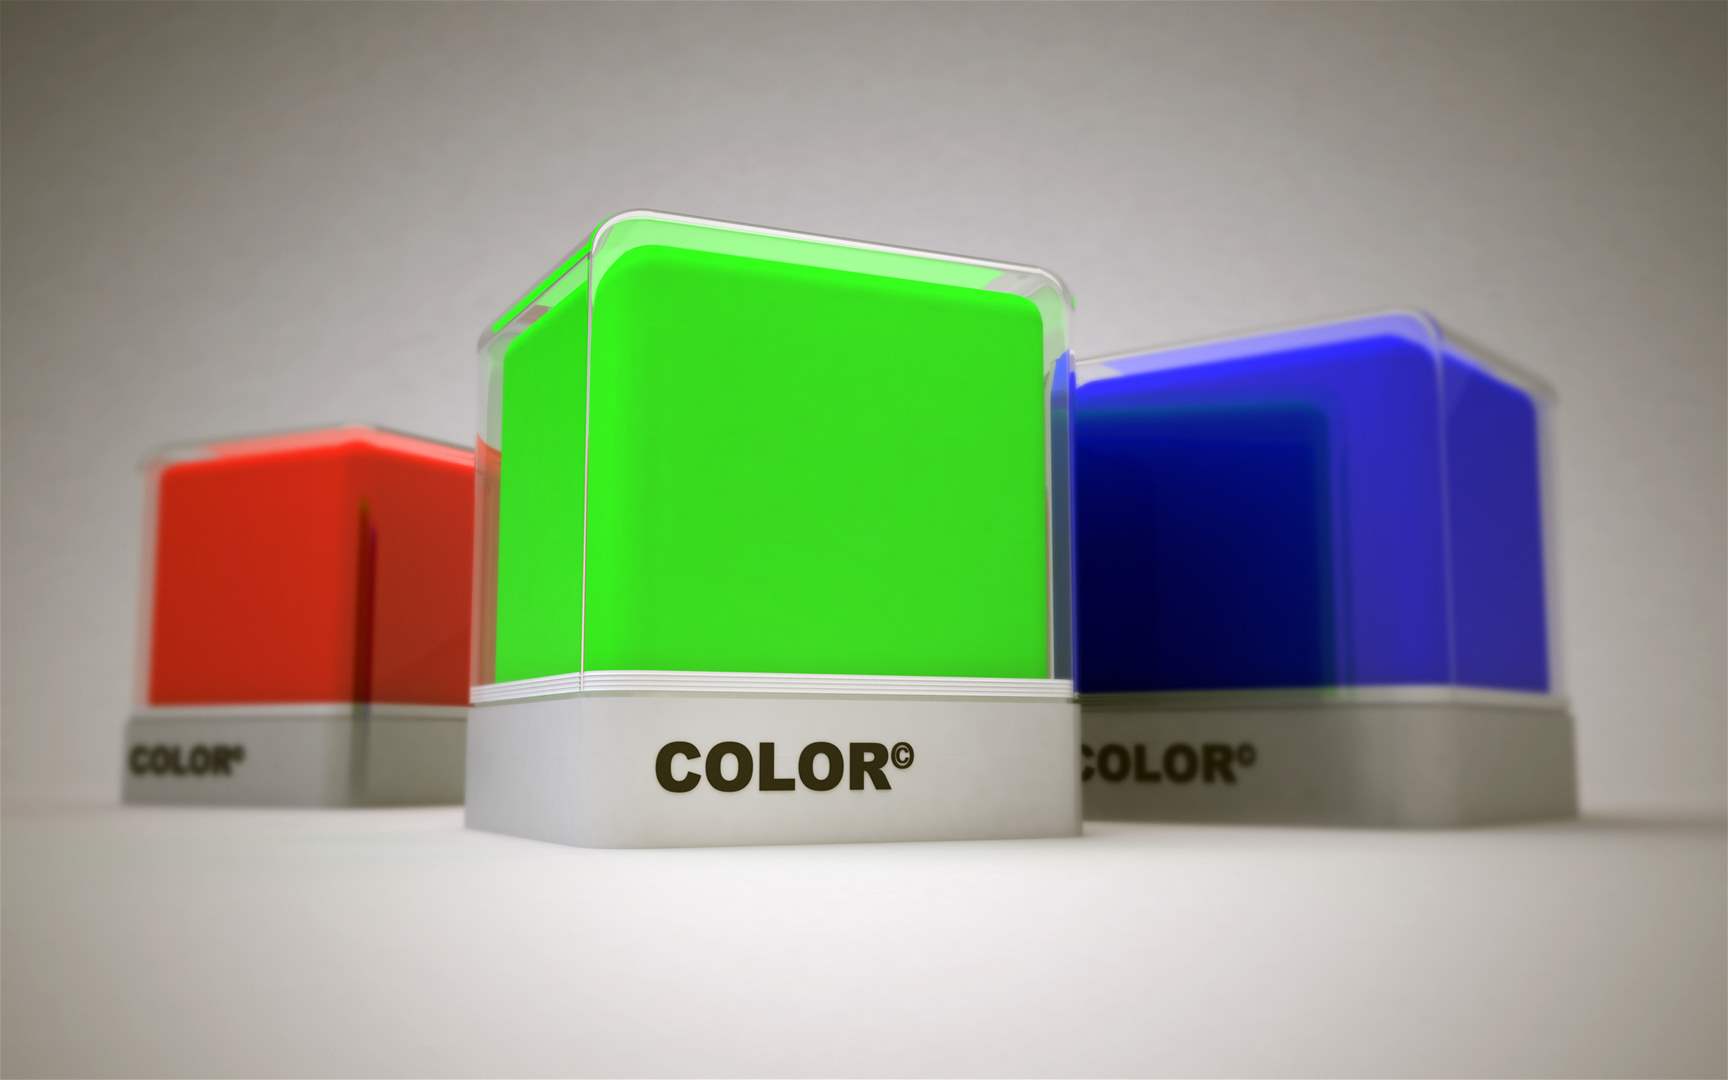 Have you ever wondered how red, green, and blue combine?